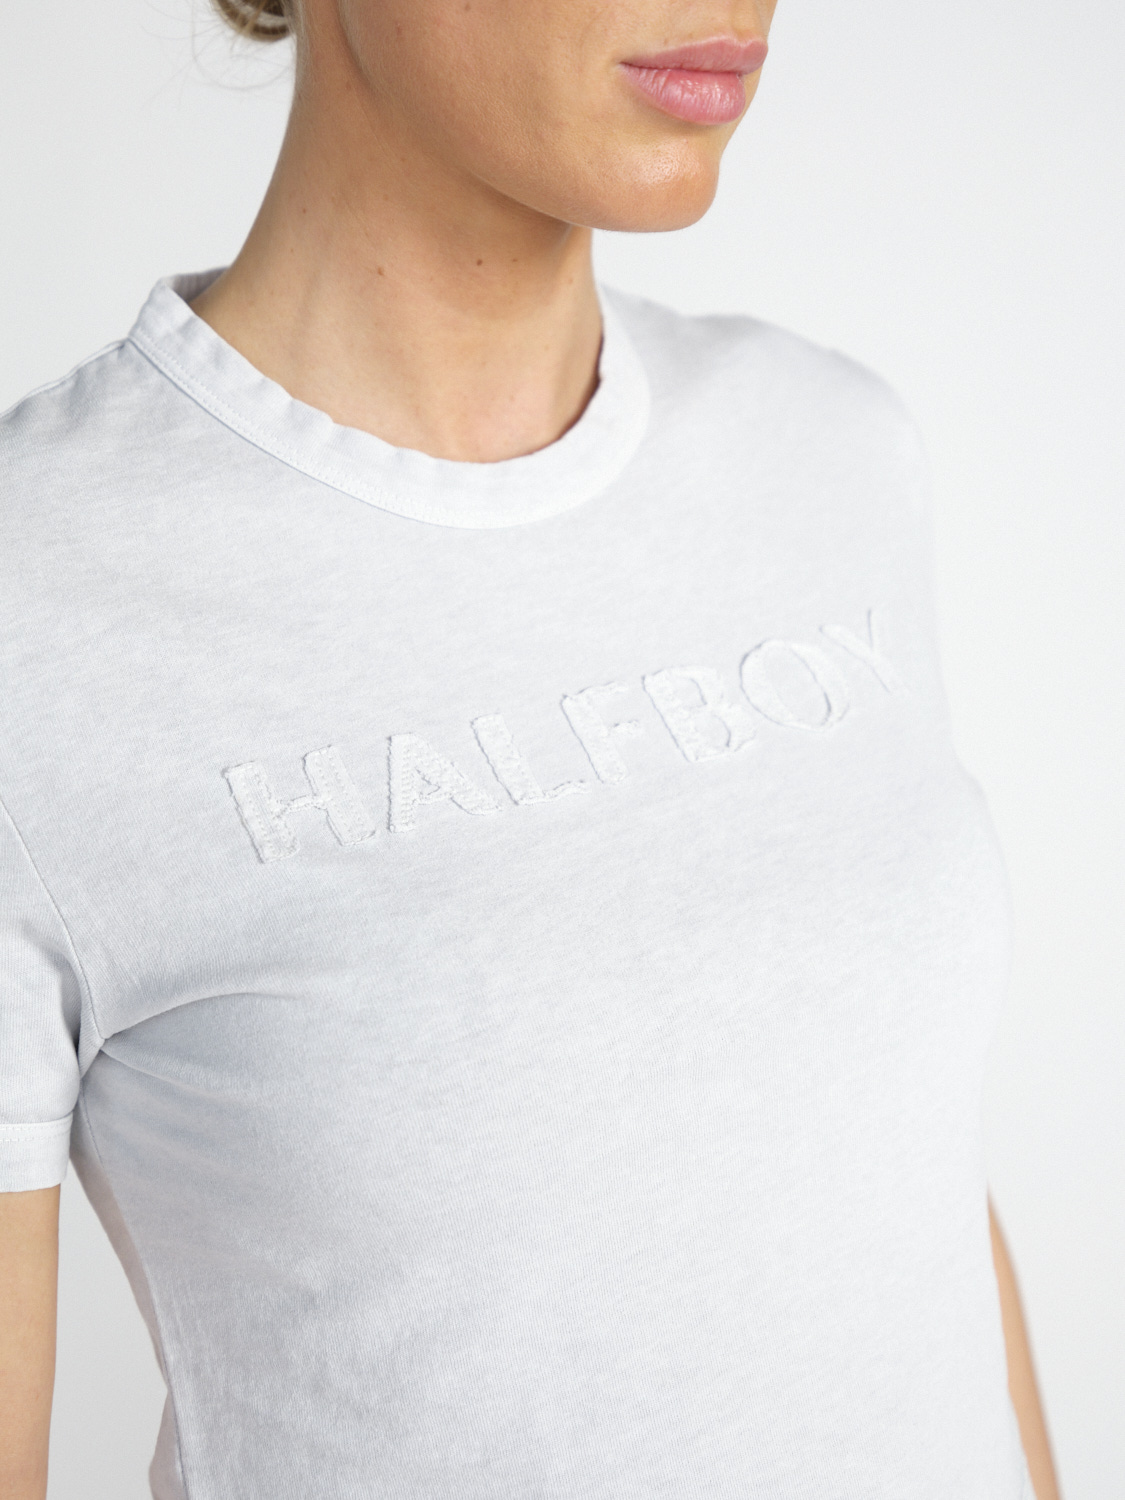 Halfboy Baby Tee cotton t-shirt with logo detail  grey XS